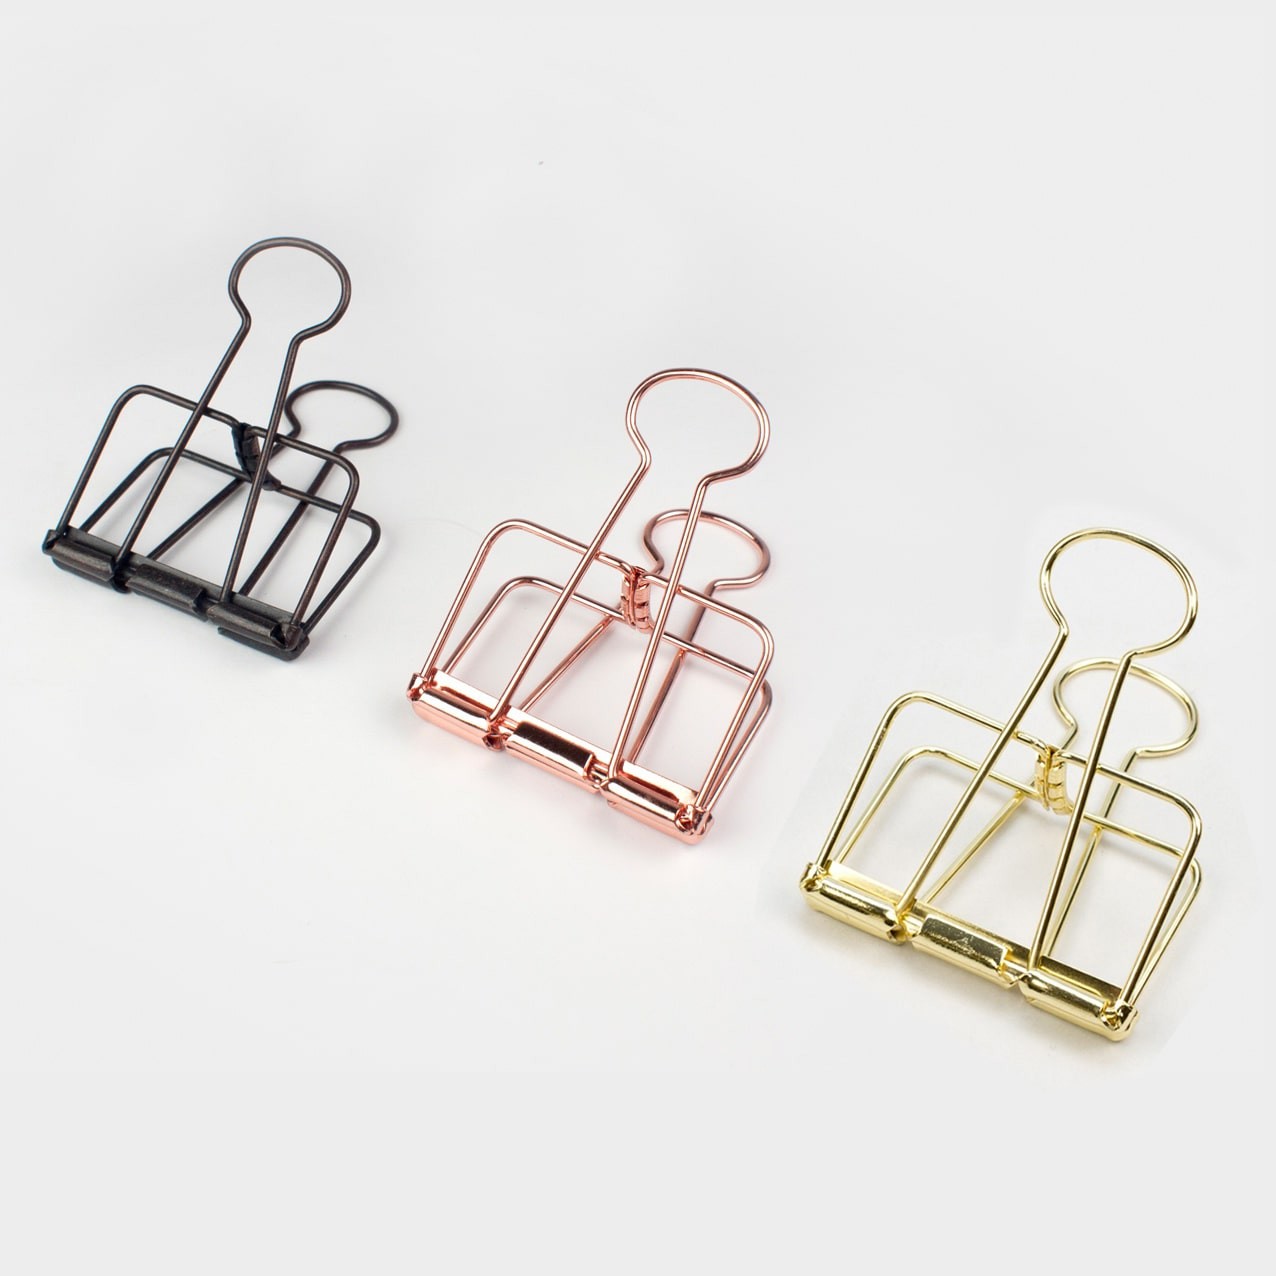 Tools To Liveby | Binder Clips Single (32mm)